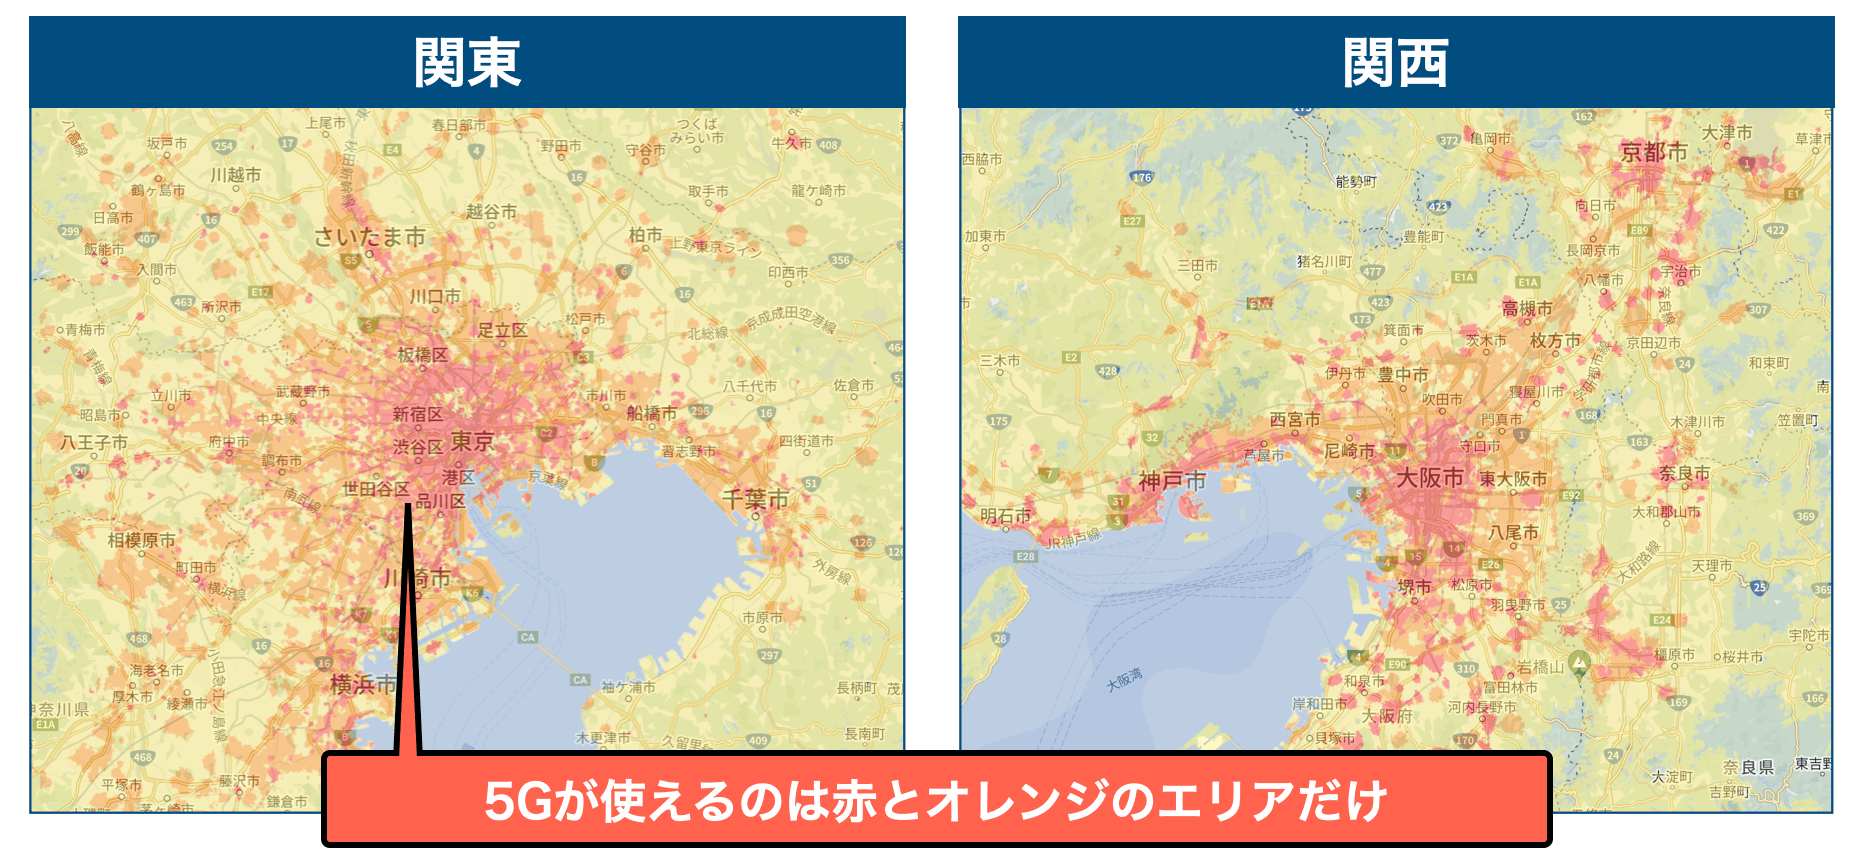 wimax_5g_area